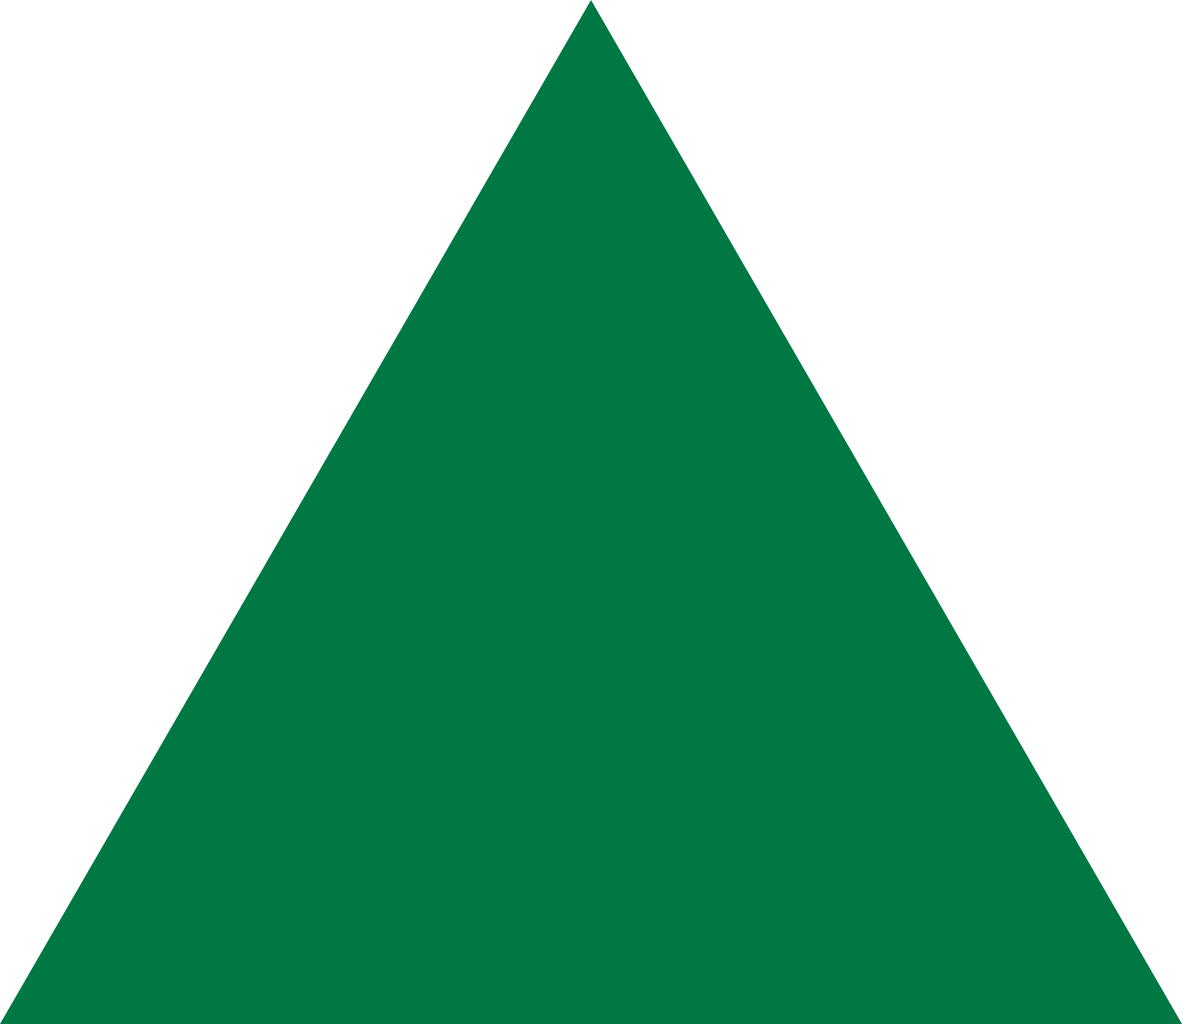 Download Green Equilateral Triangle Point Up Green Triangle Png Image